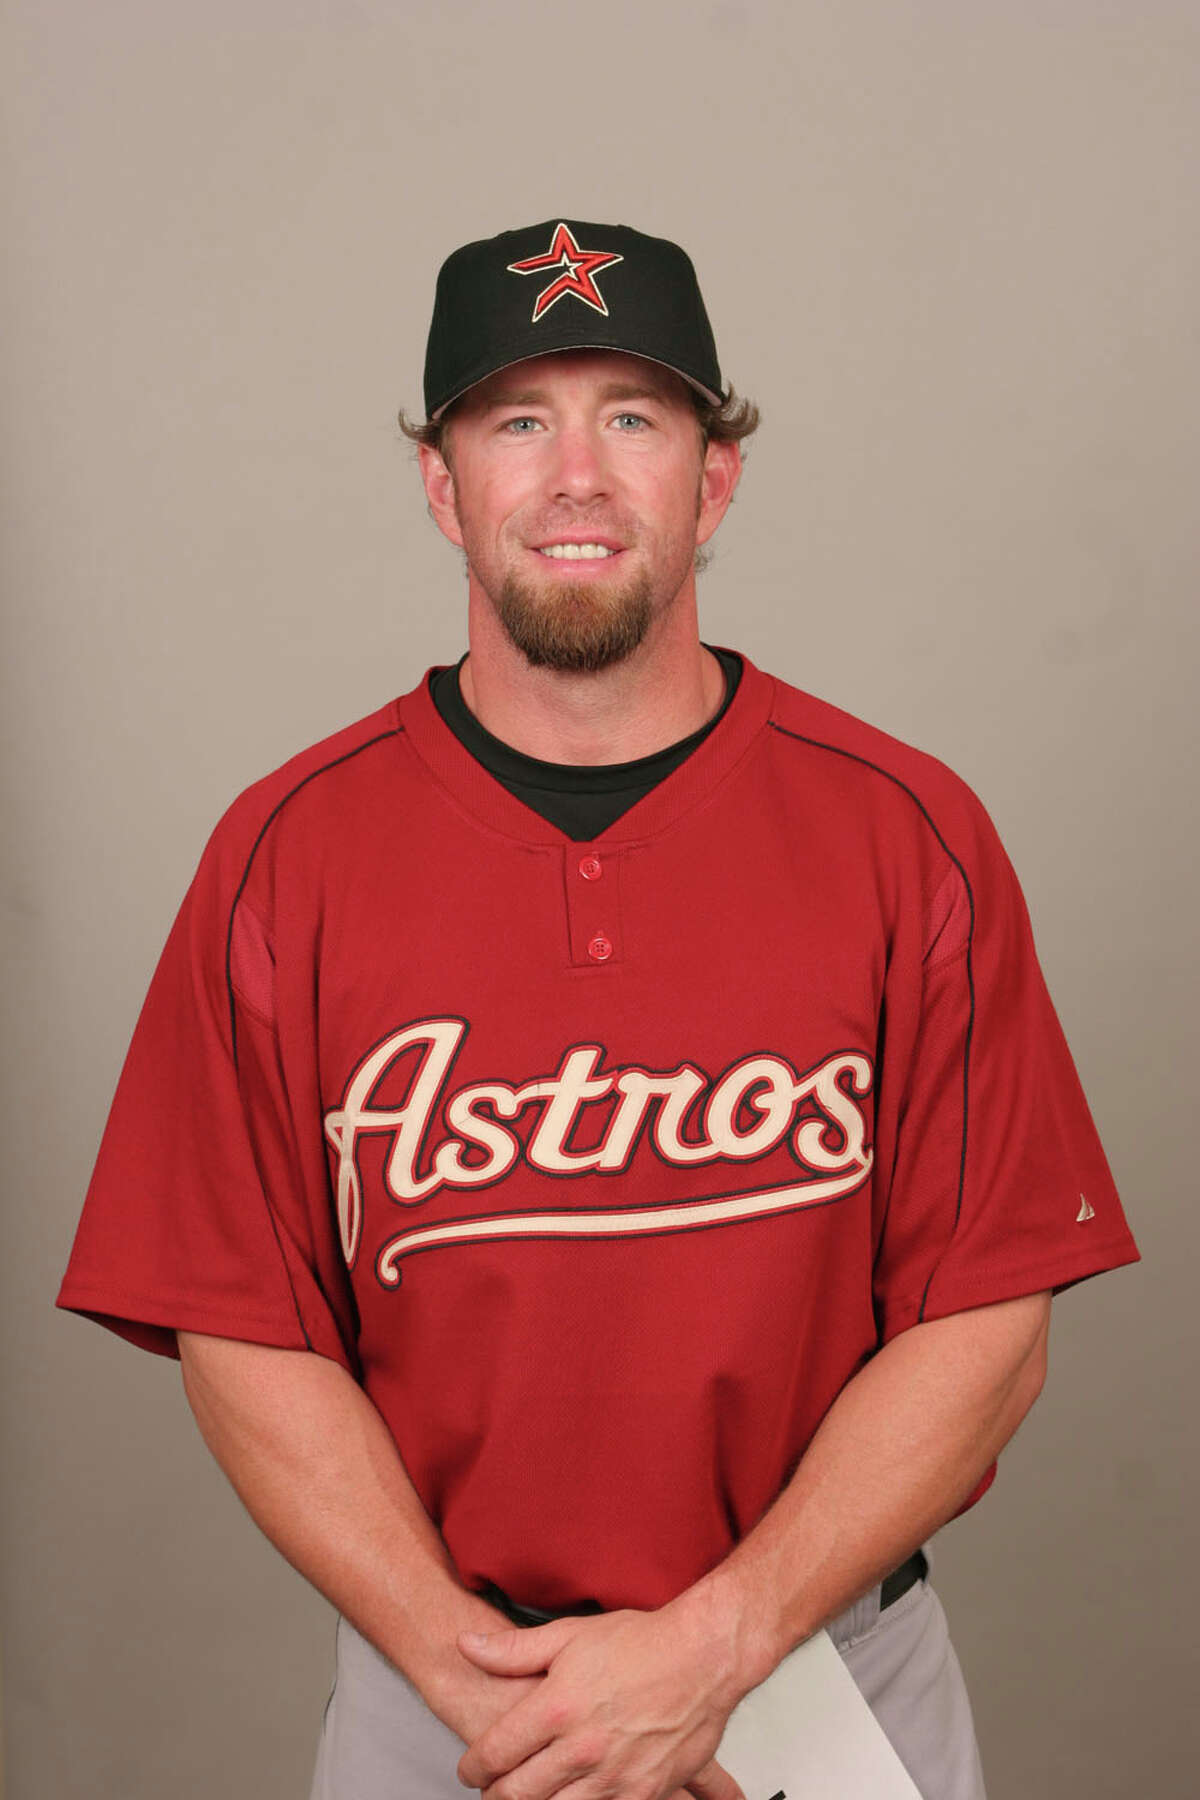 KISSIMMEE, FL - FEBRUARY 25: Jeff Bagwell of the Houston Astros during photo day at Osceola County Stadium on February 25, 2006 in Kissimmee, Florida. (Photo by Tony Firriolo/MLB Photos via Getty Images) *** Local Caption *** Jeff Bagwell